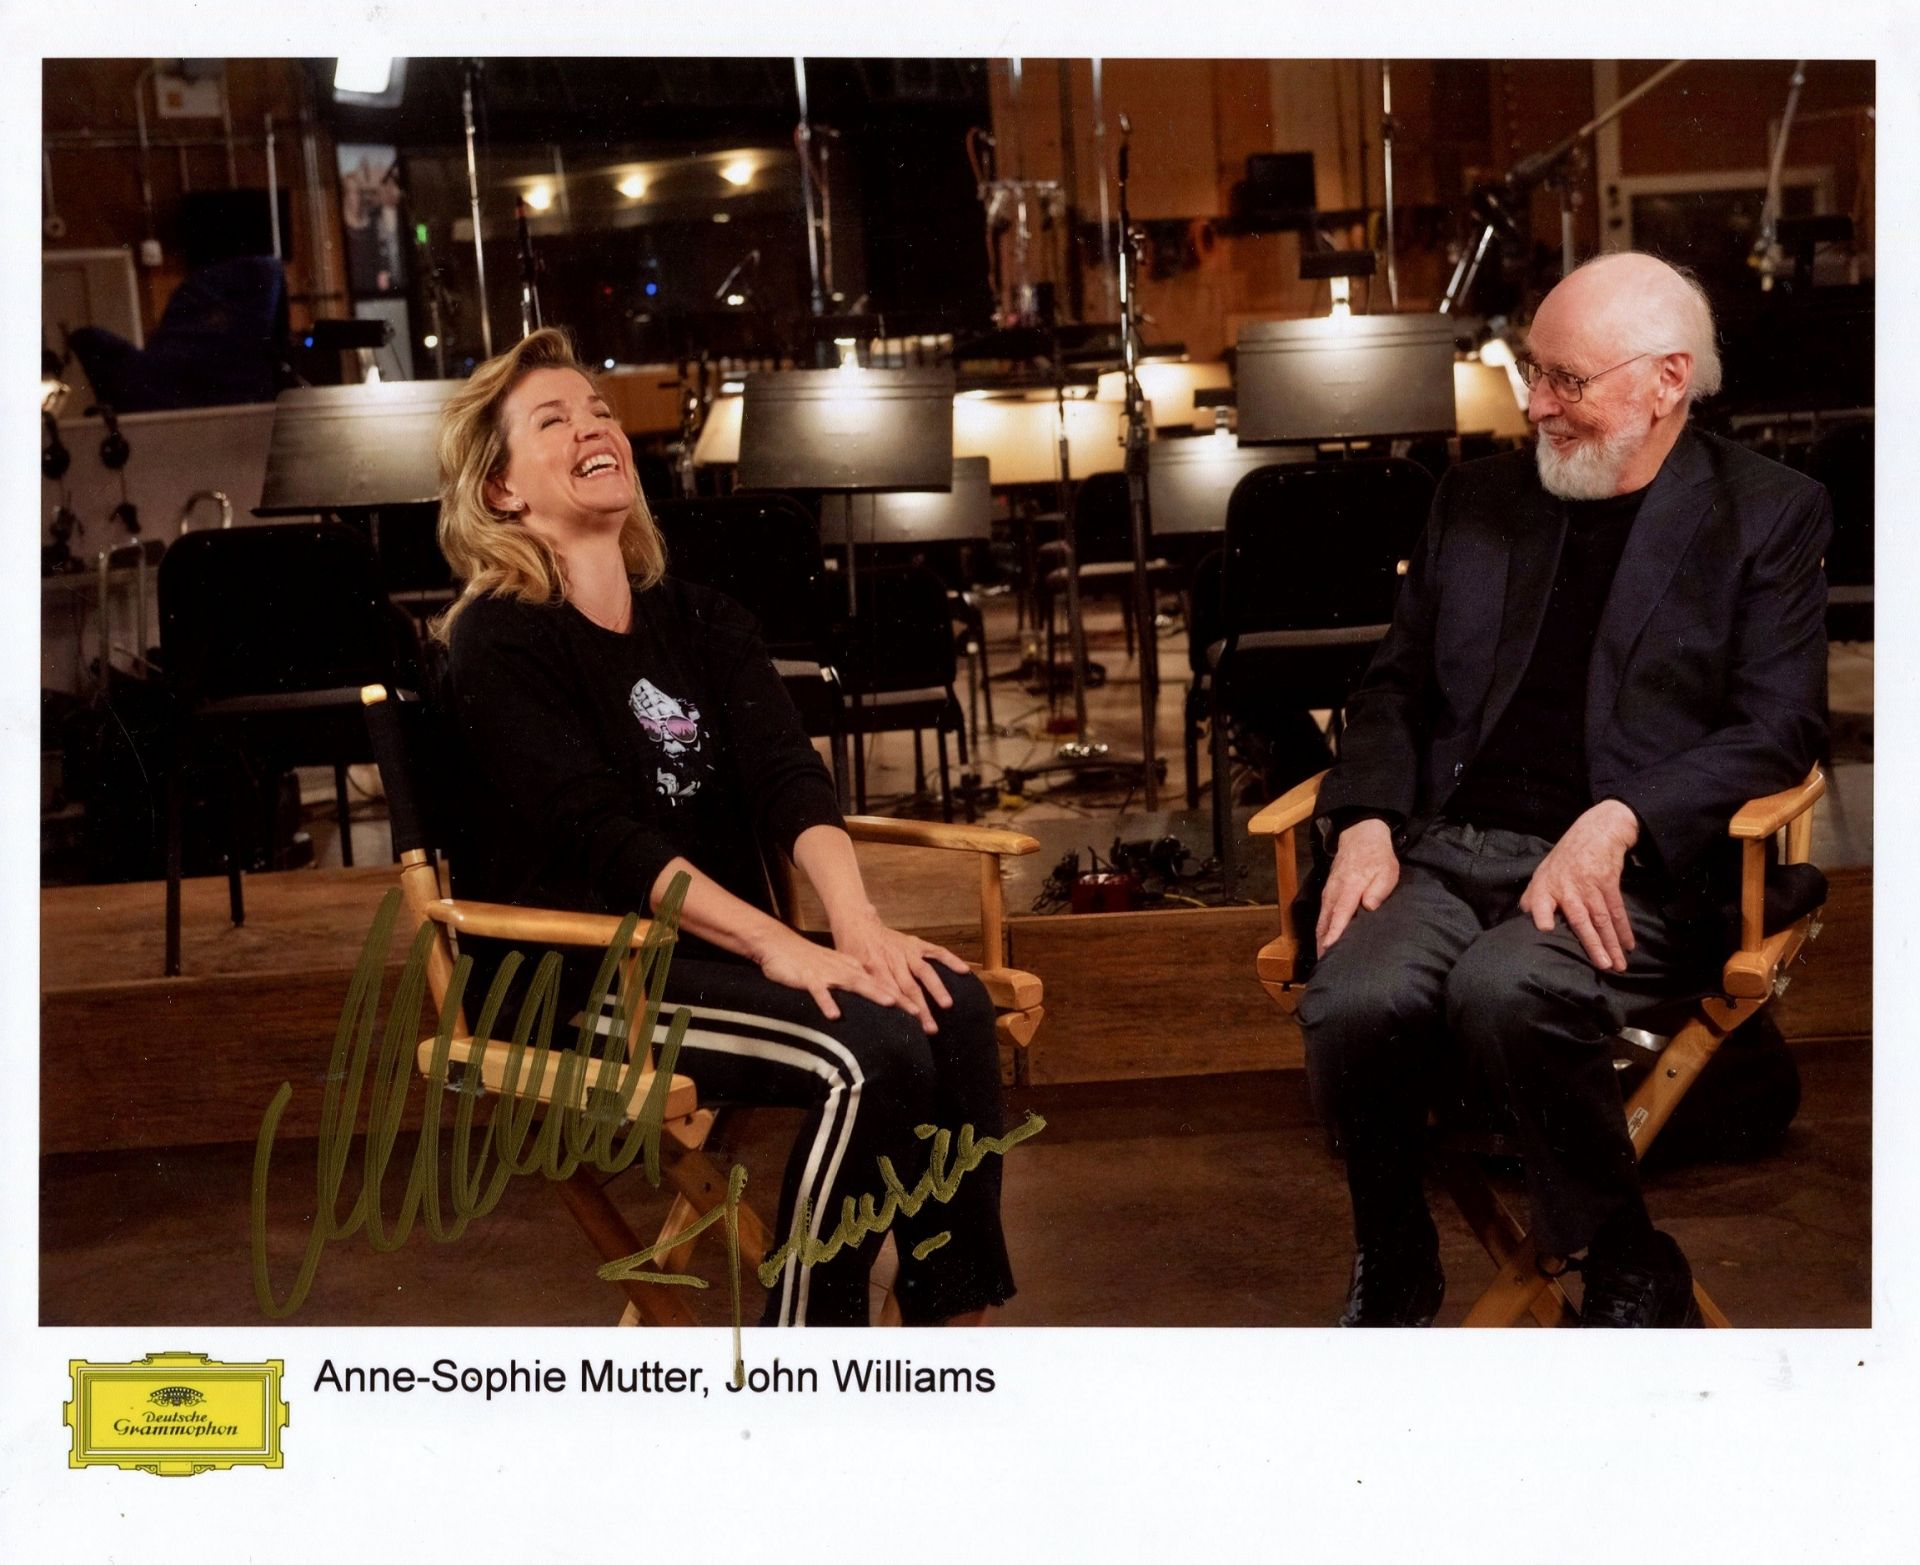 WILLIAMS JOHN & MUTTER ANNE-SOPHIE: John Williams (1932- ) American Composer and Conductor.